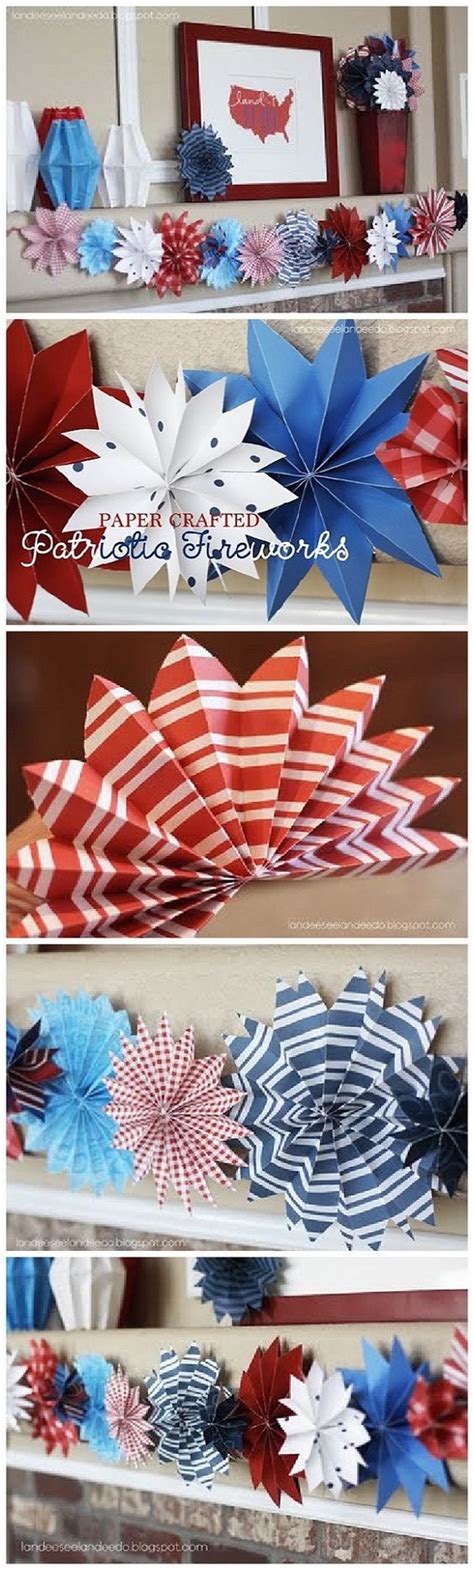 Diy Patriotic Crafts For 4th Of July Decoration For Creative Juice